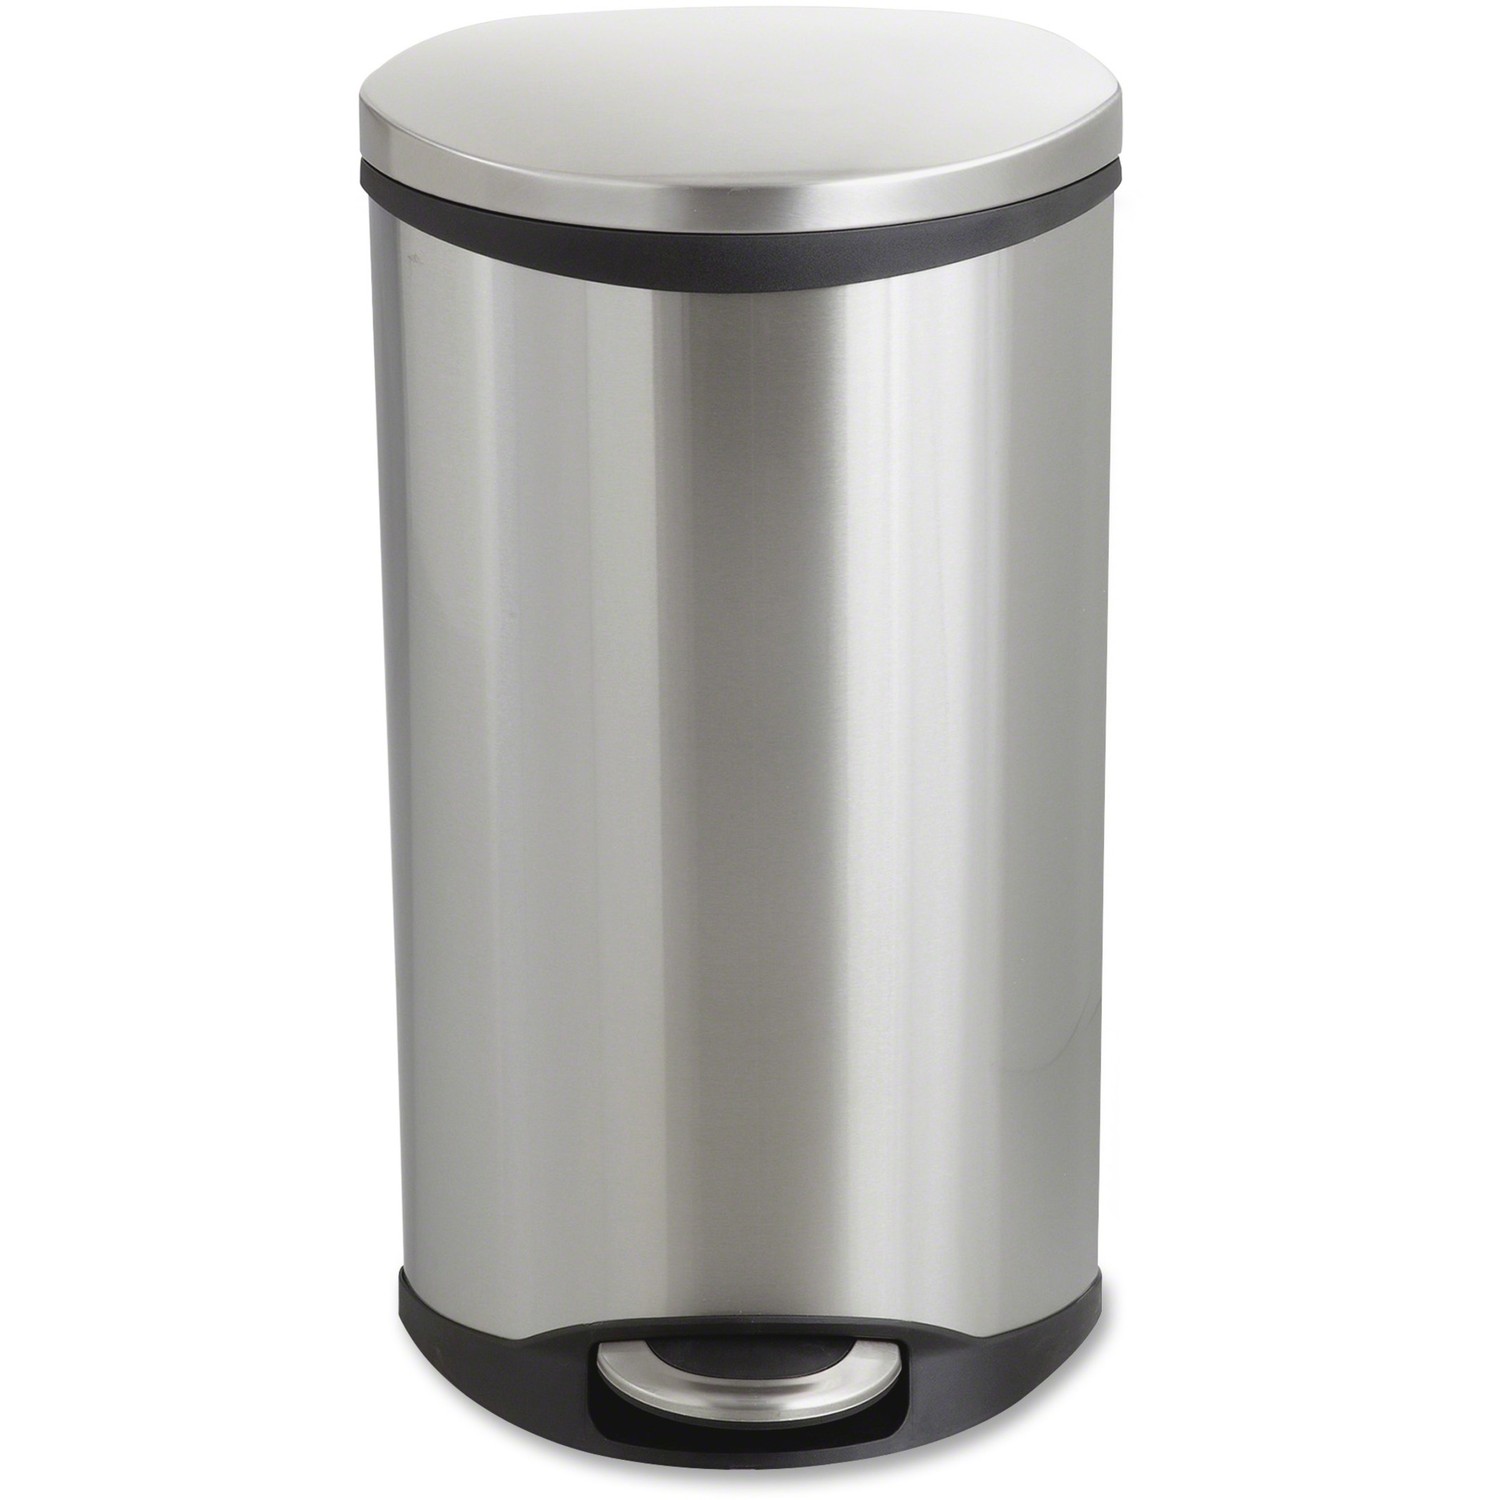 Safco Ellipse Hands Free Step-On Receptacle - 7.50 gal Capacity - 26.5" Height x 15" Width x 13.5" Depth - Steel, Plastic - Stai